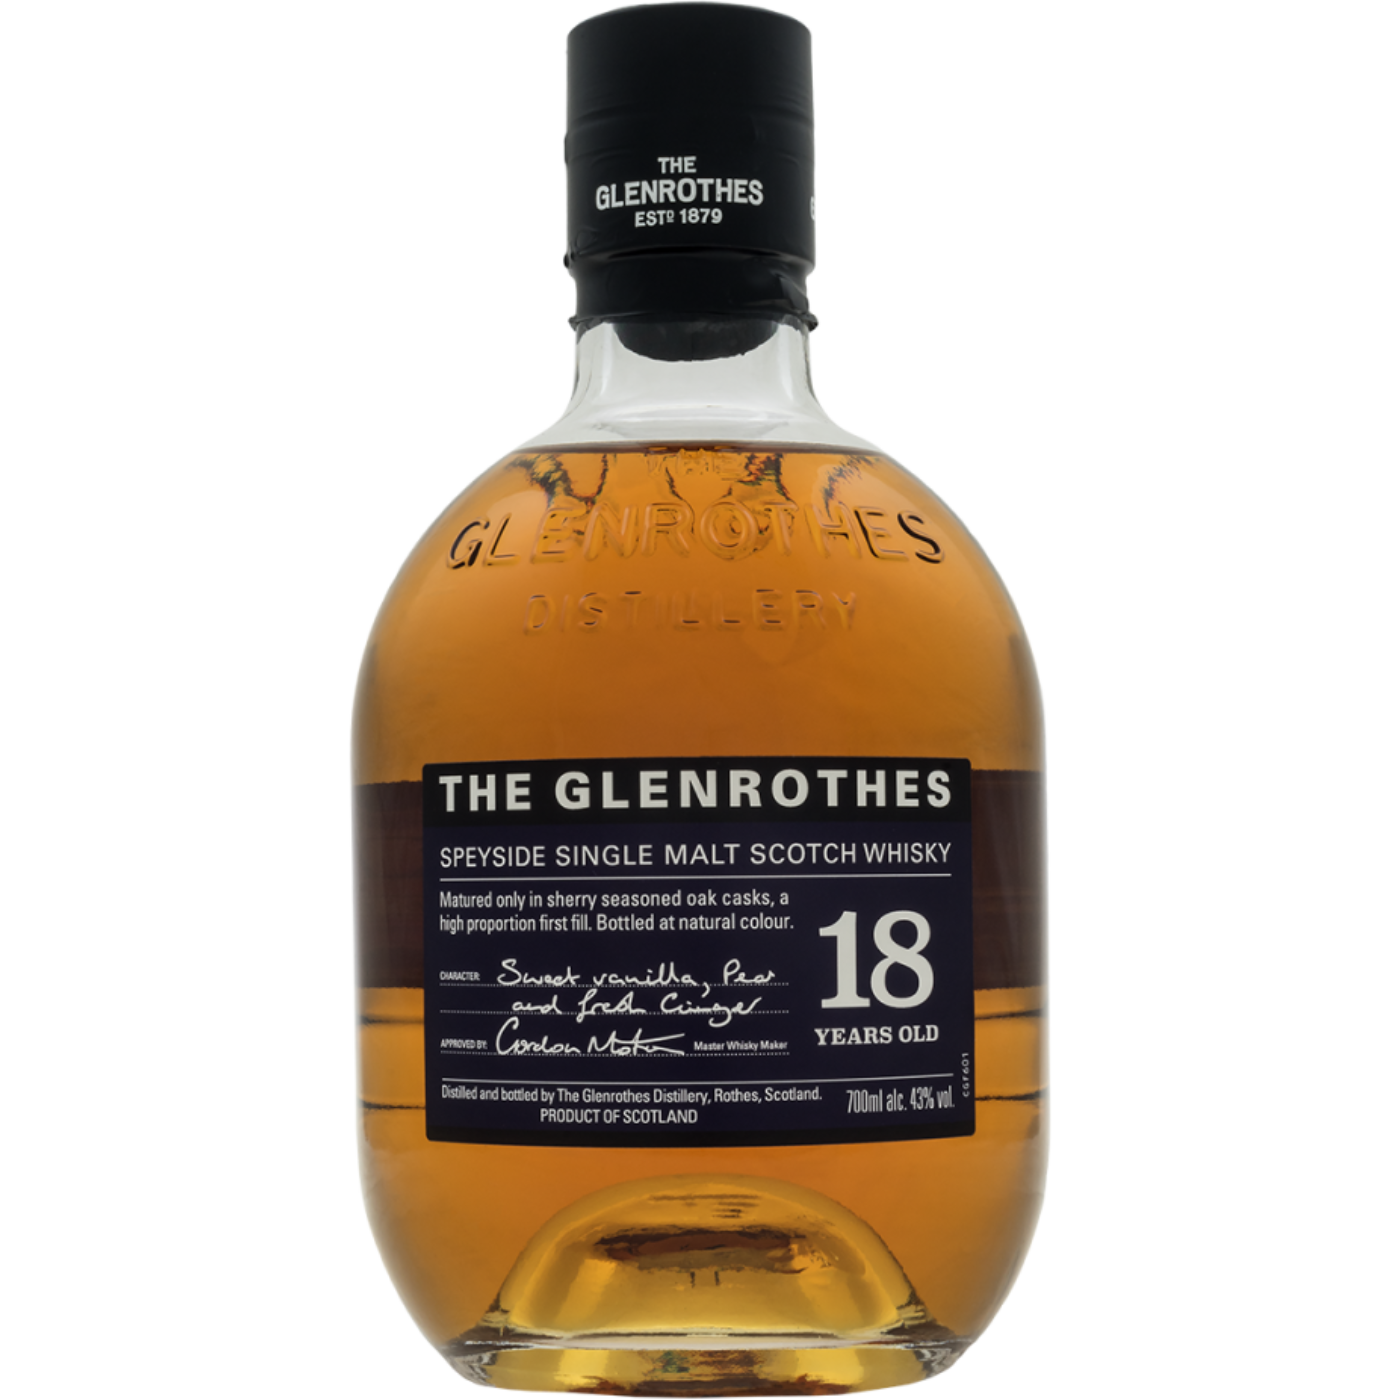 GLENROTHES 18 YEAR OLD